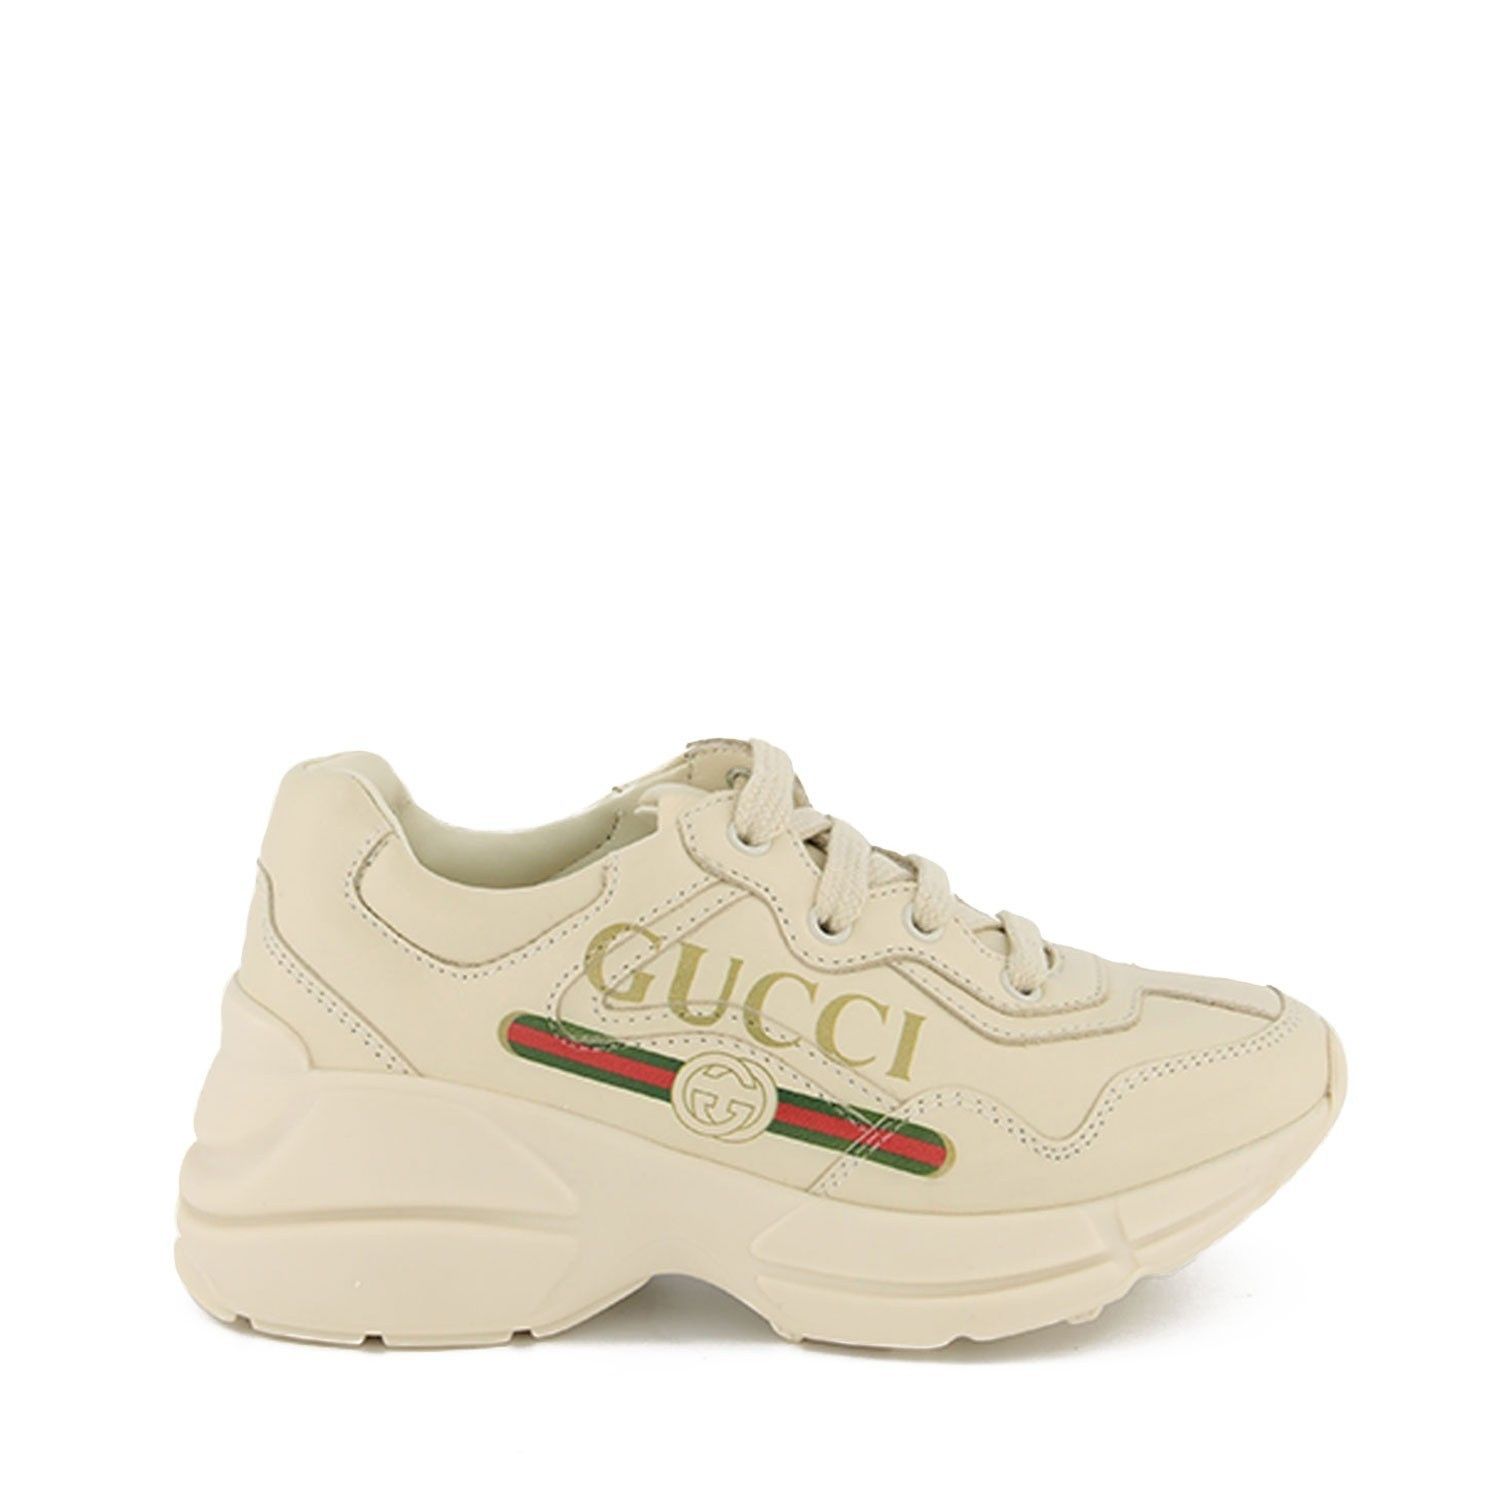 Gucci 603880 Unisex Off White at Coccinelle